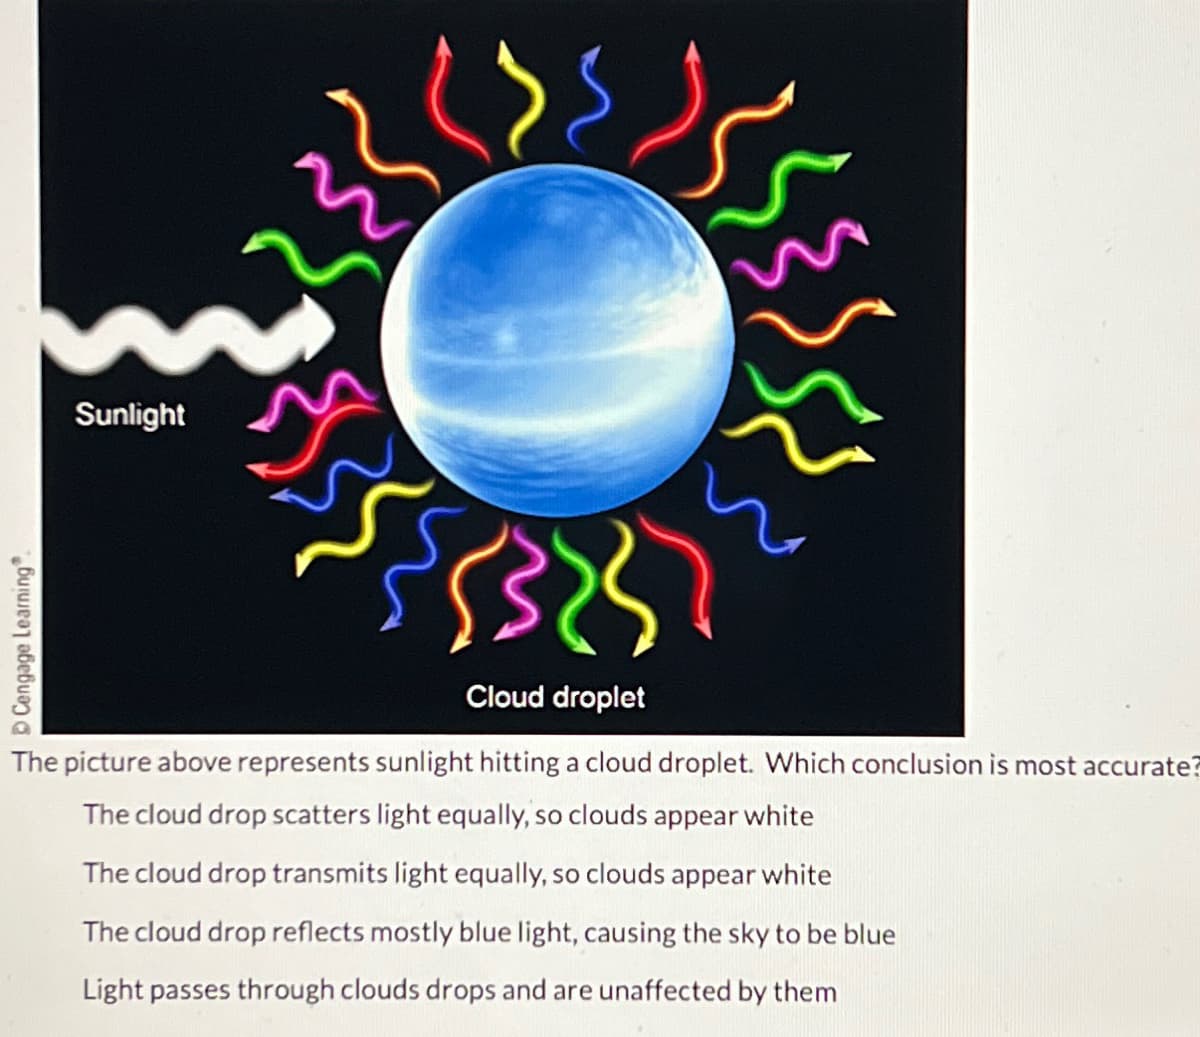 © Cengage Learning®.
Sunlight
दह
Cloud droplet
The picture above represents sunlight hitting a cloud droplet. Which conclusion is most accurate?
The cloud drop scatters light equally, so clouds appear white
The cloud drop transmits light equally, so clouds appear white
The cloud drop reflects mostly blue light, causing the sky to be blue
Light passes through clouds drops and are unaffected by them